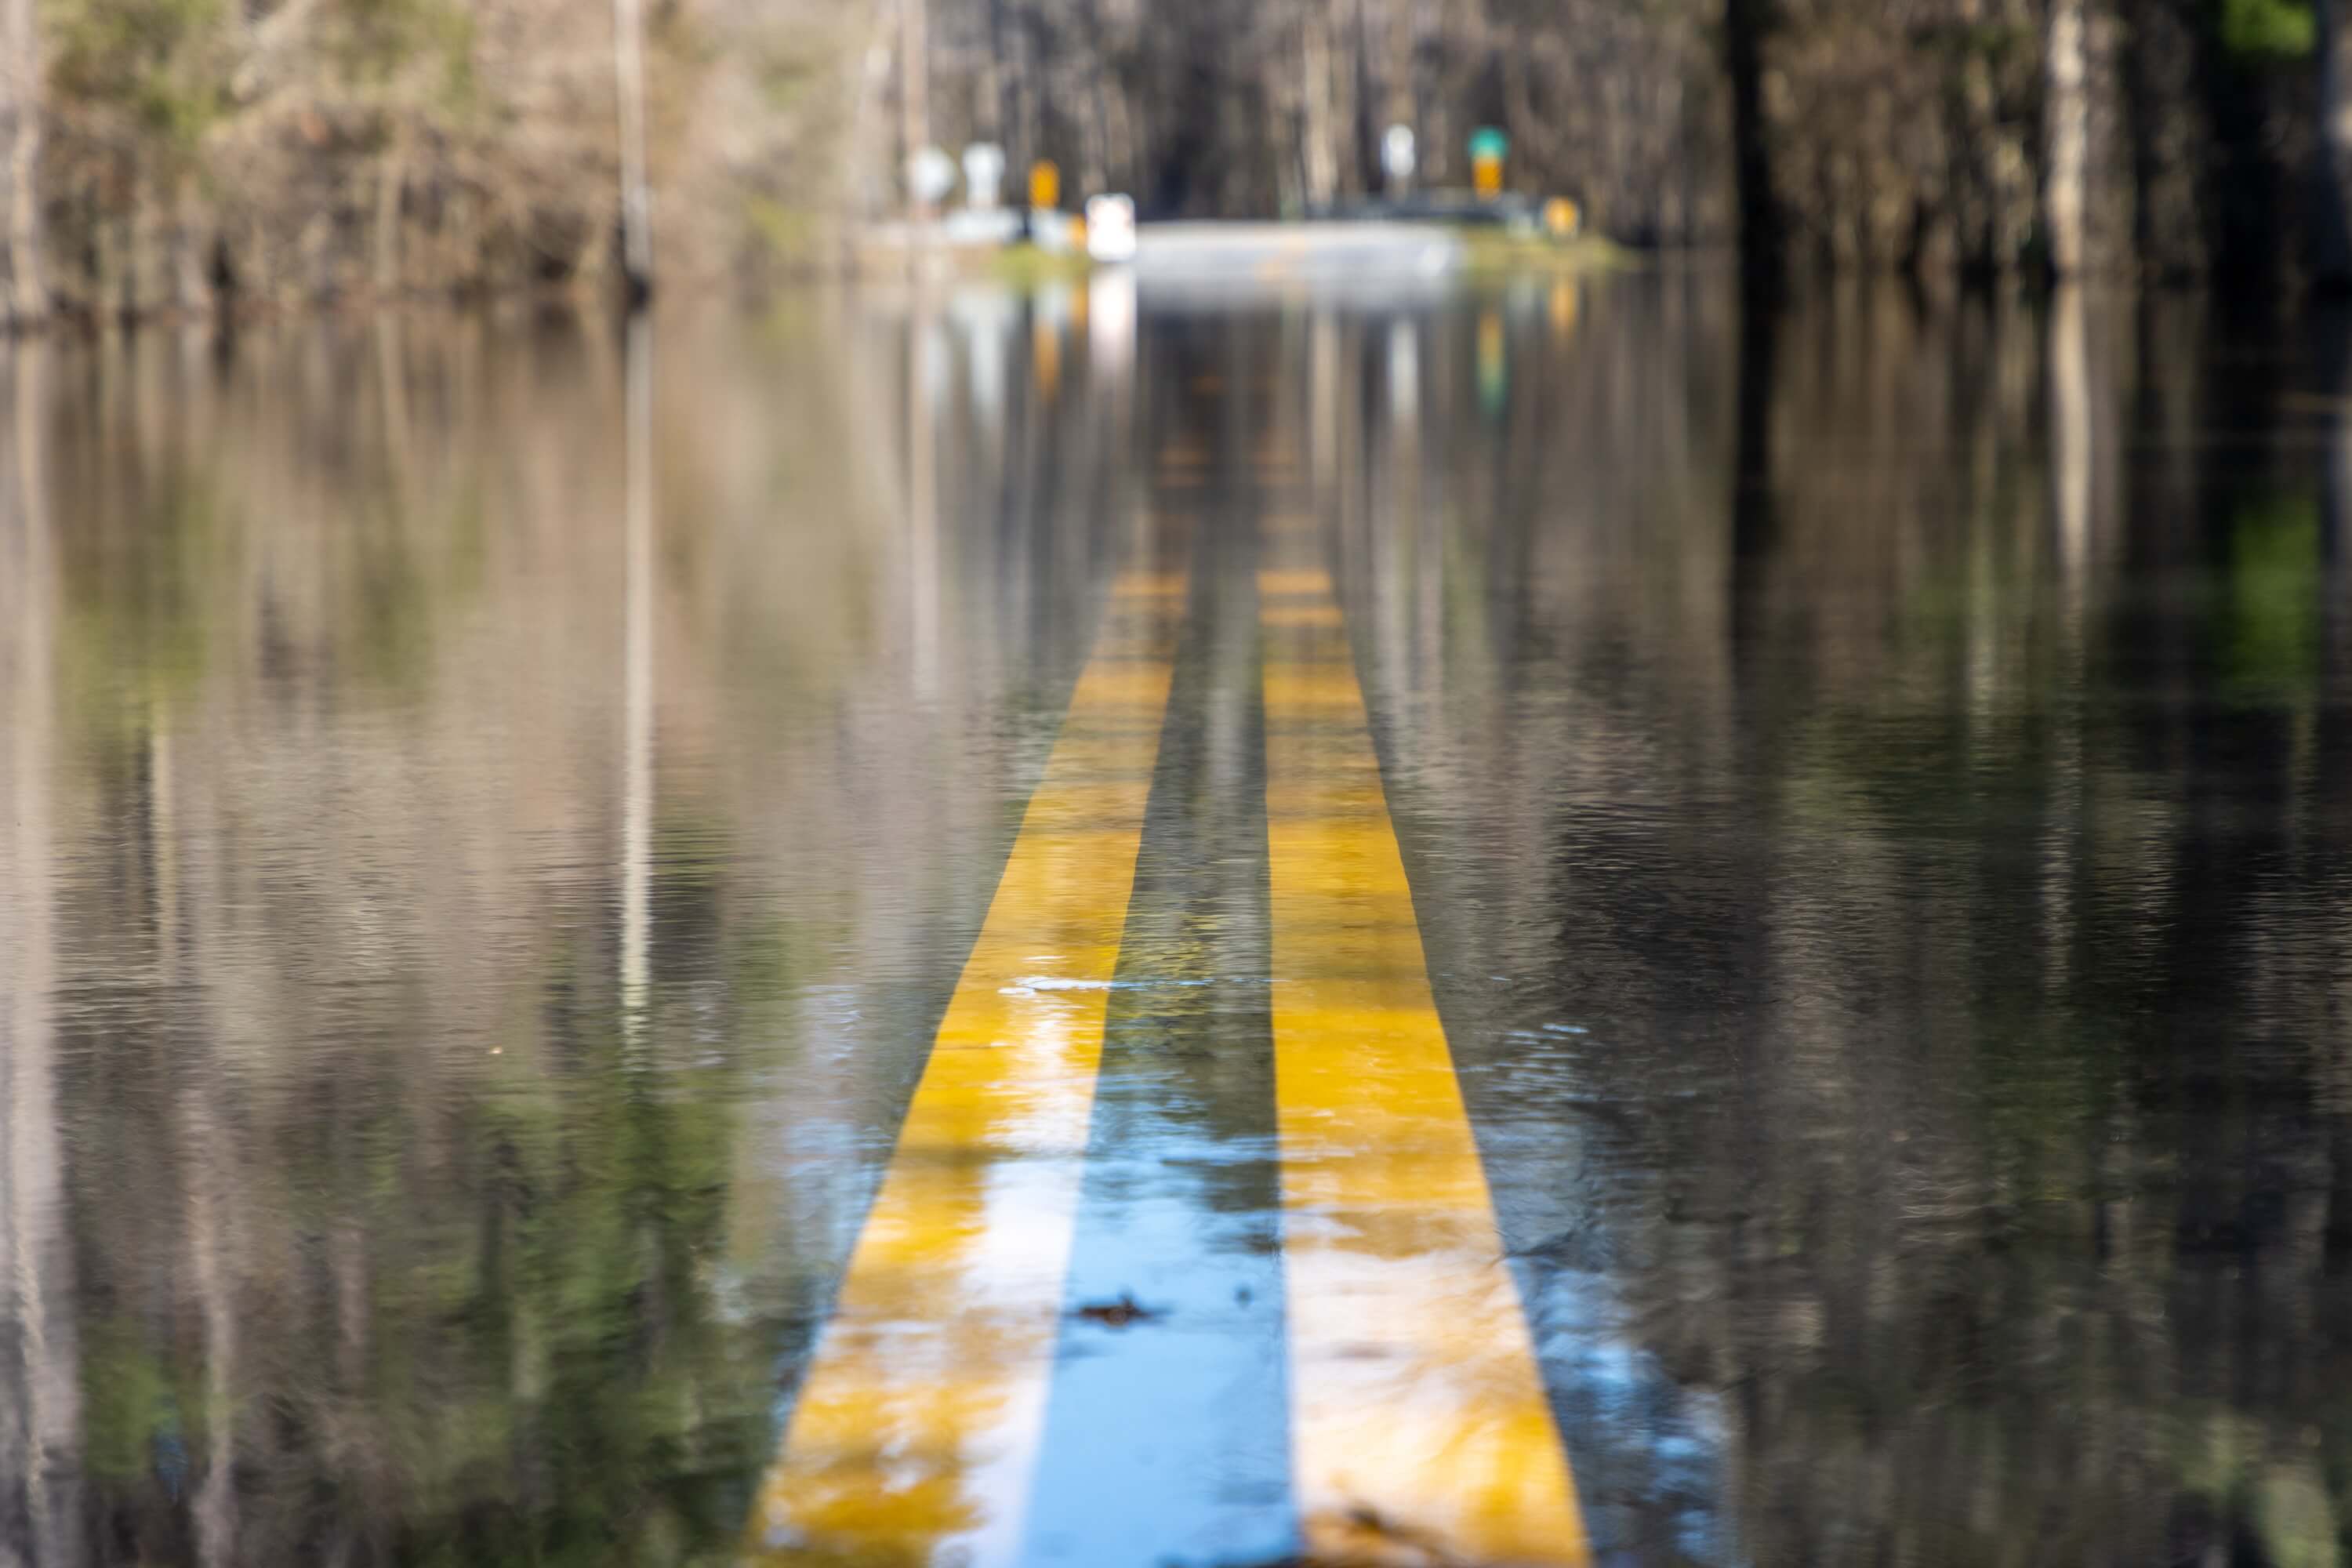 Floodwaters from hurricanes on the road